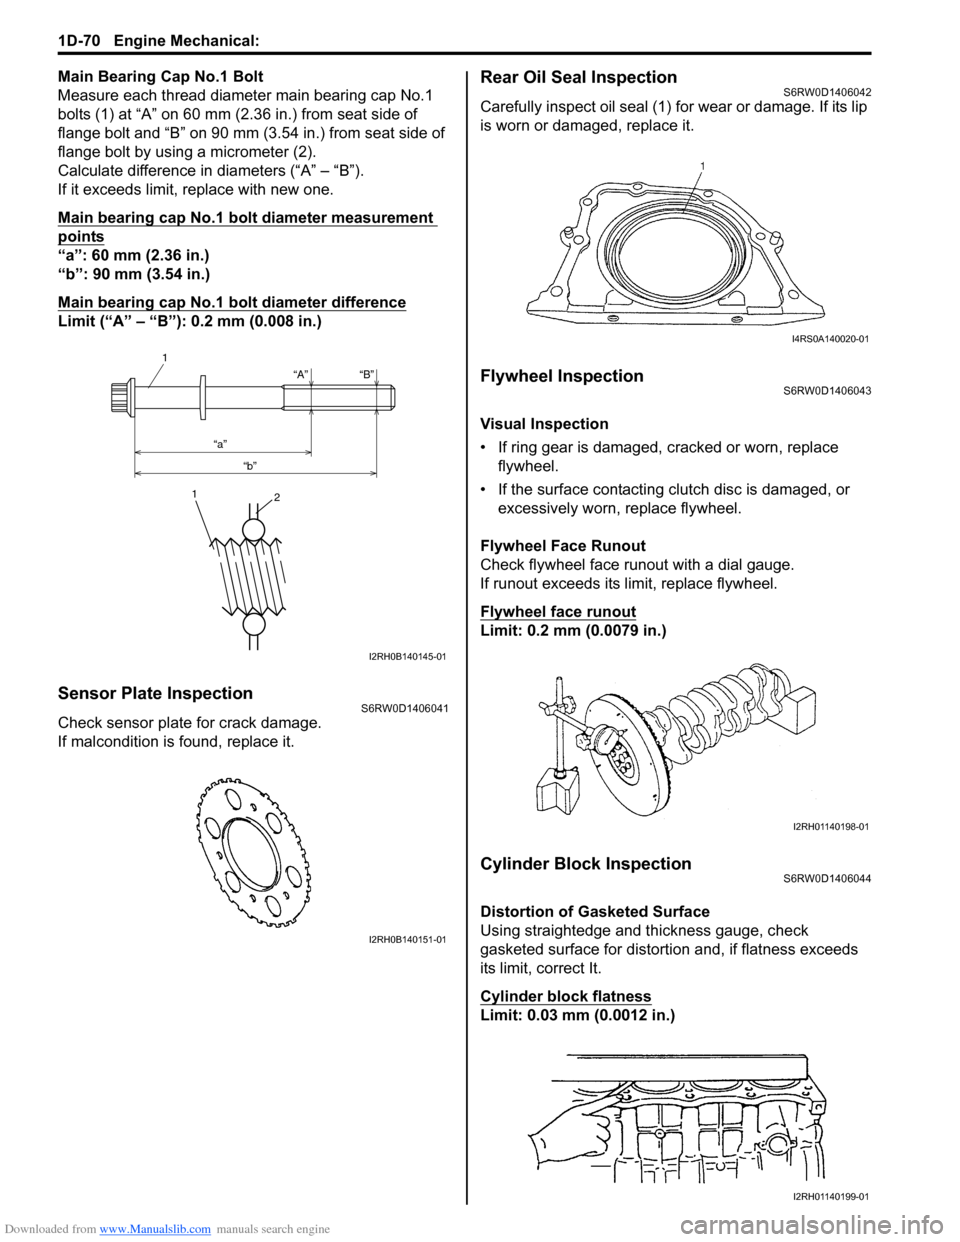 SUZUKI SX4 2006 1.G Service Workshop Manual Downloaded from www.Manualslib.com manuals search engine 1D-70 Engine Mechanical: 
Main Bearing Cap No.1 Bolt
Measure each thread diameter main bearing cap No.1 
bolts (1) at “A” on 60 mm (2.36 in